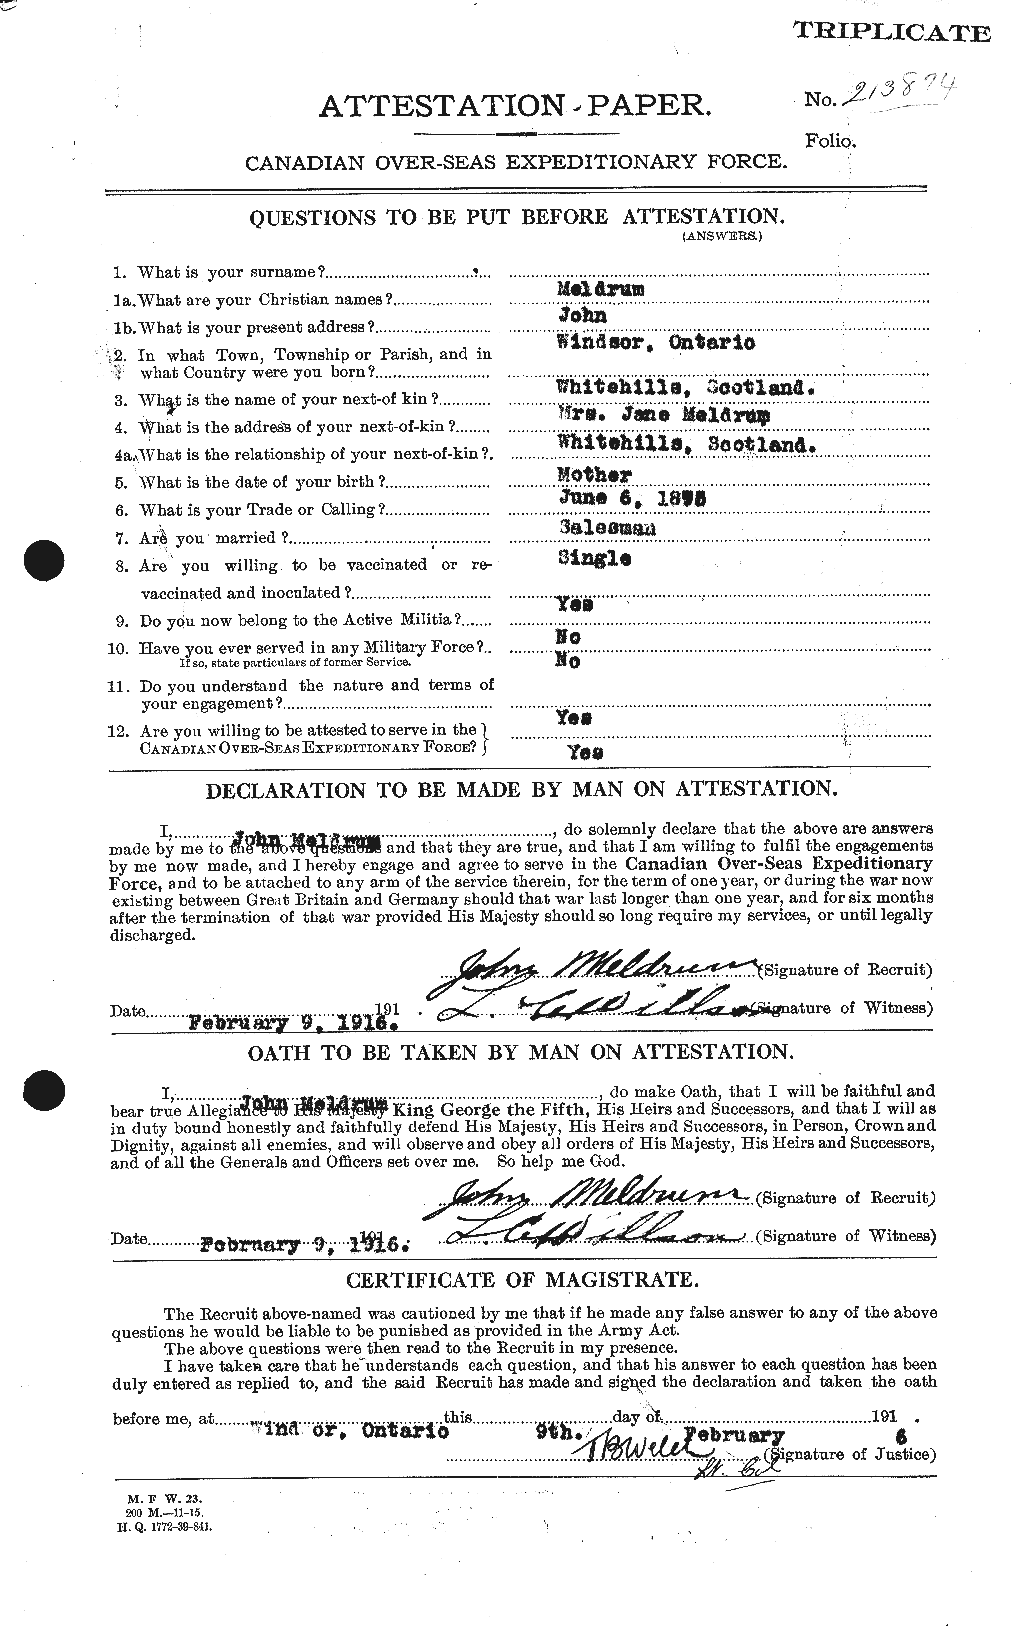 Personnel Records of the First World War - CEF 493624a